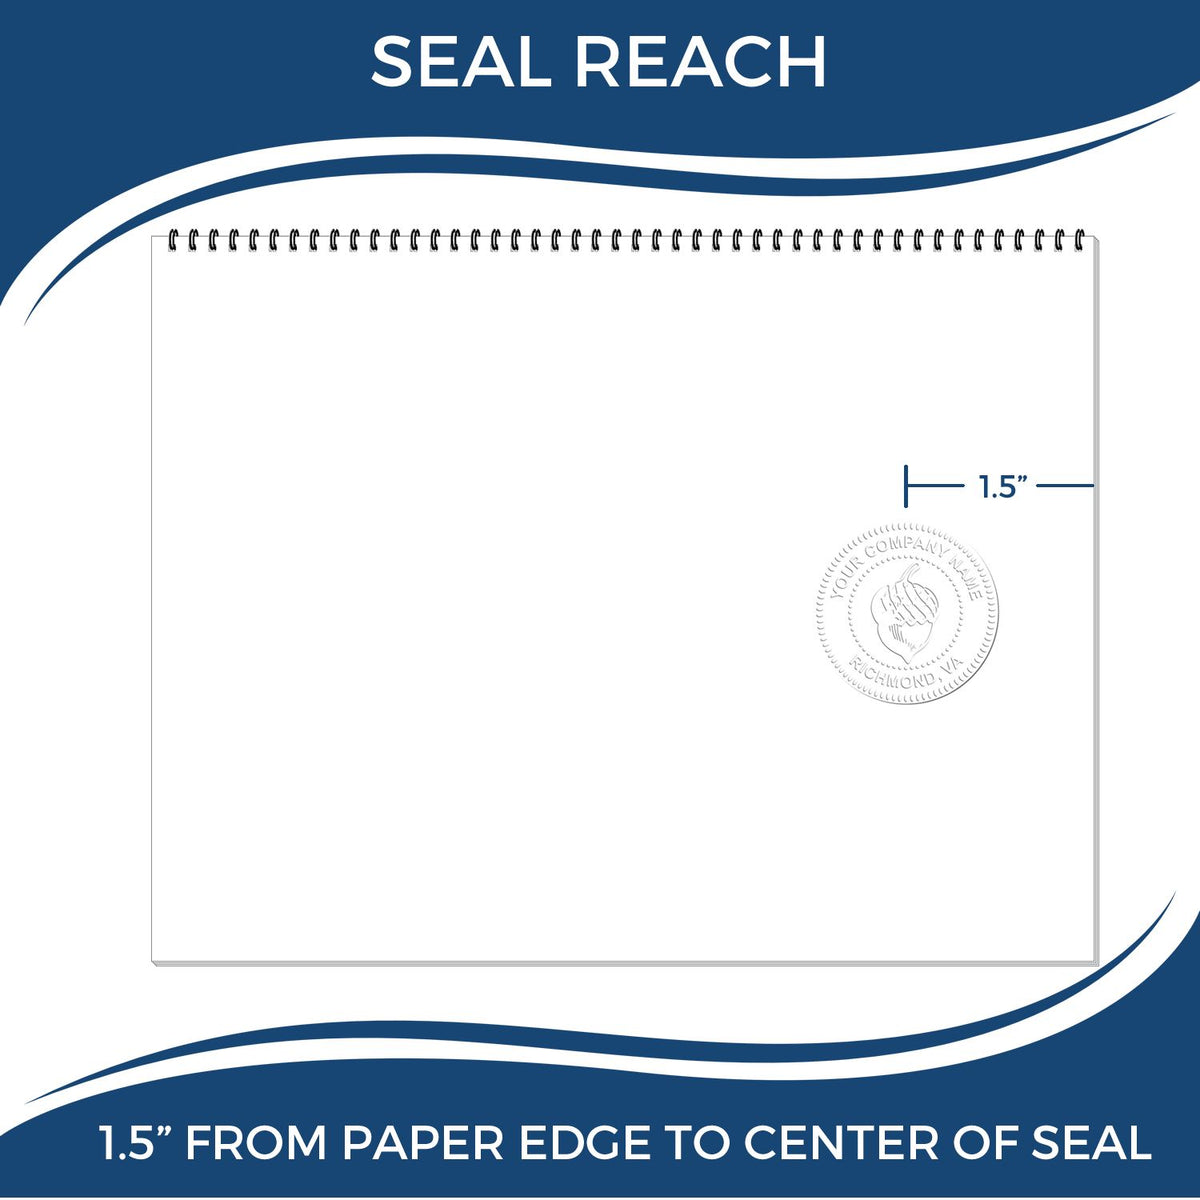 An infographic showing the seal reach which is represented by a ruler and a miniature seal image of the South Dakota Engineer Desk Seal